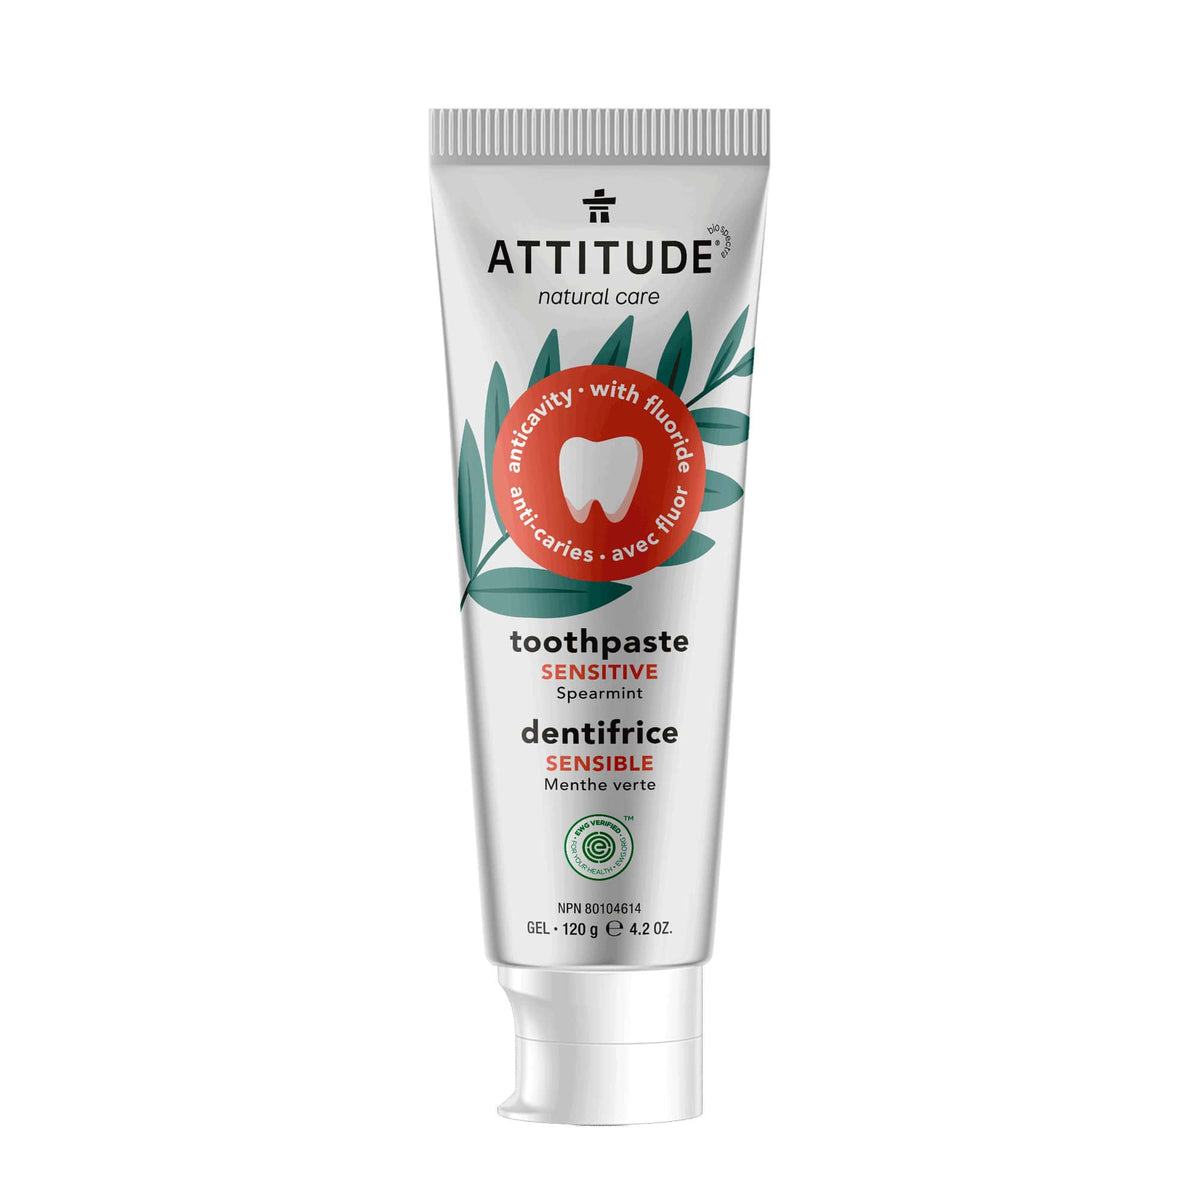 Toothpaste Sensitive with Fluoride - 120g - ProCare Outlet by Attitude